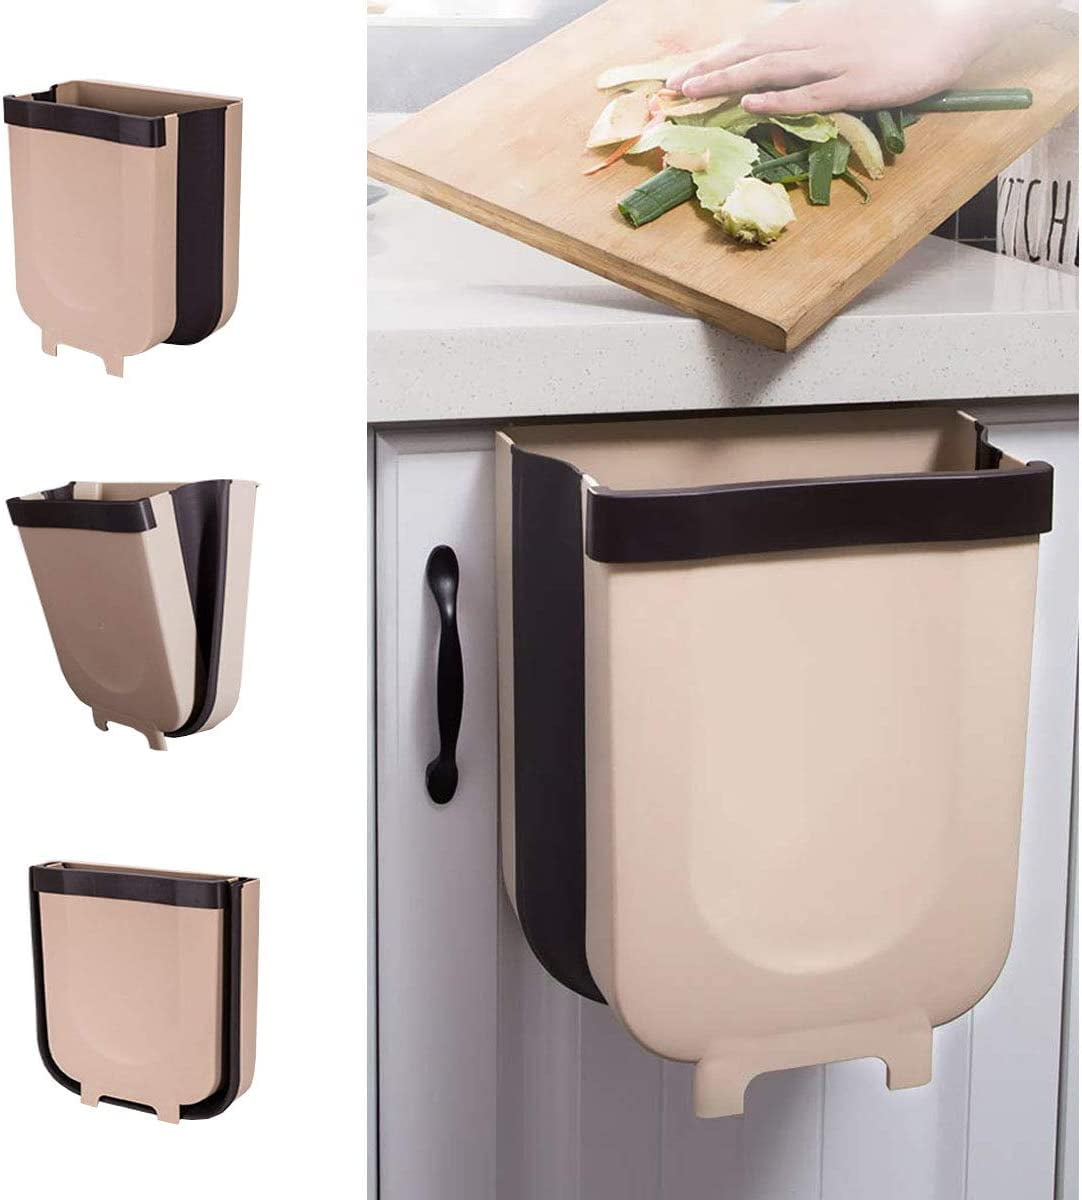 9L/2.3 Gallon Collapsible Trash Bin Small Compact Garbage Can Attached to Cabinet Door Kitchen Drawer Bedroom Dorm Room Car Waste Bin Kitchen Hanging Trash Can